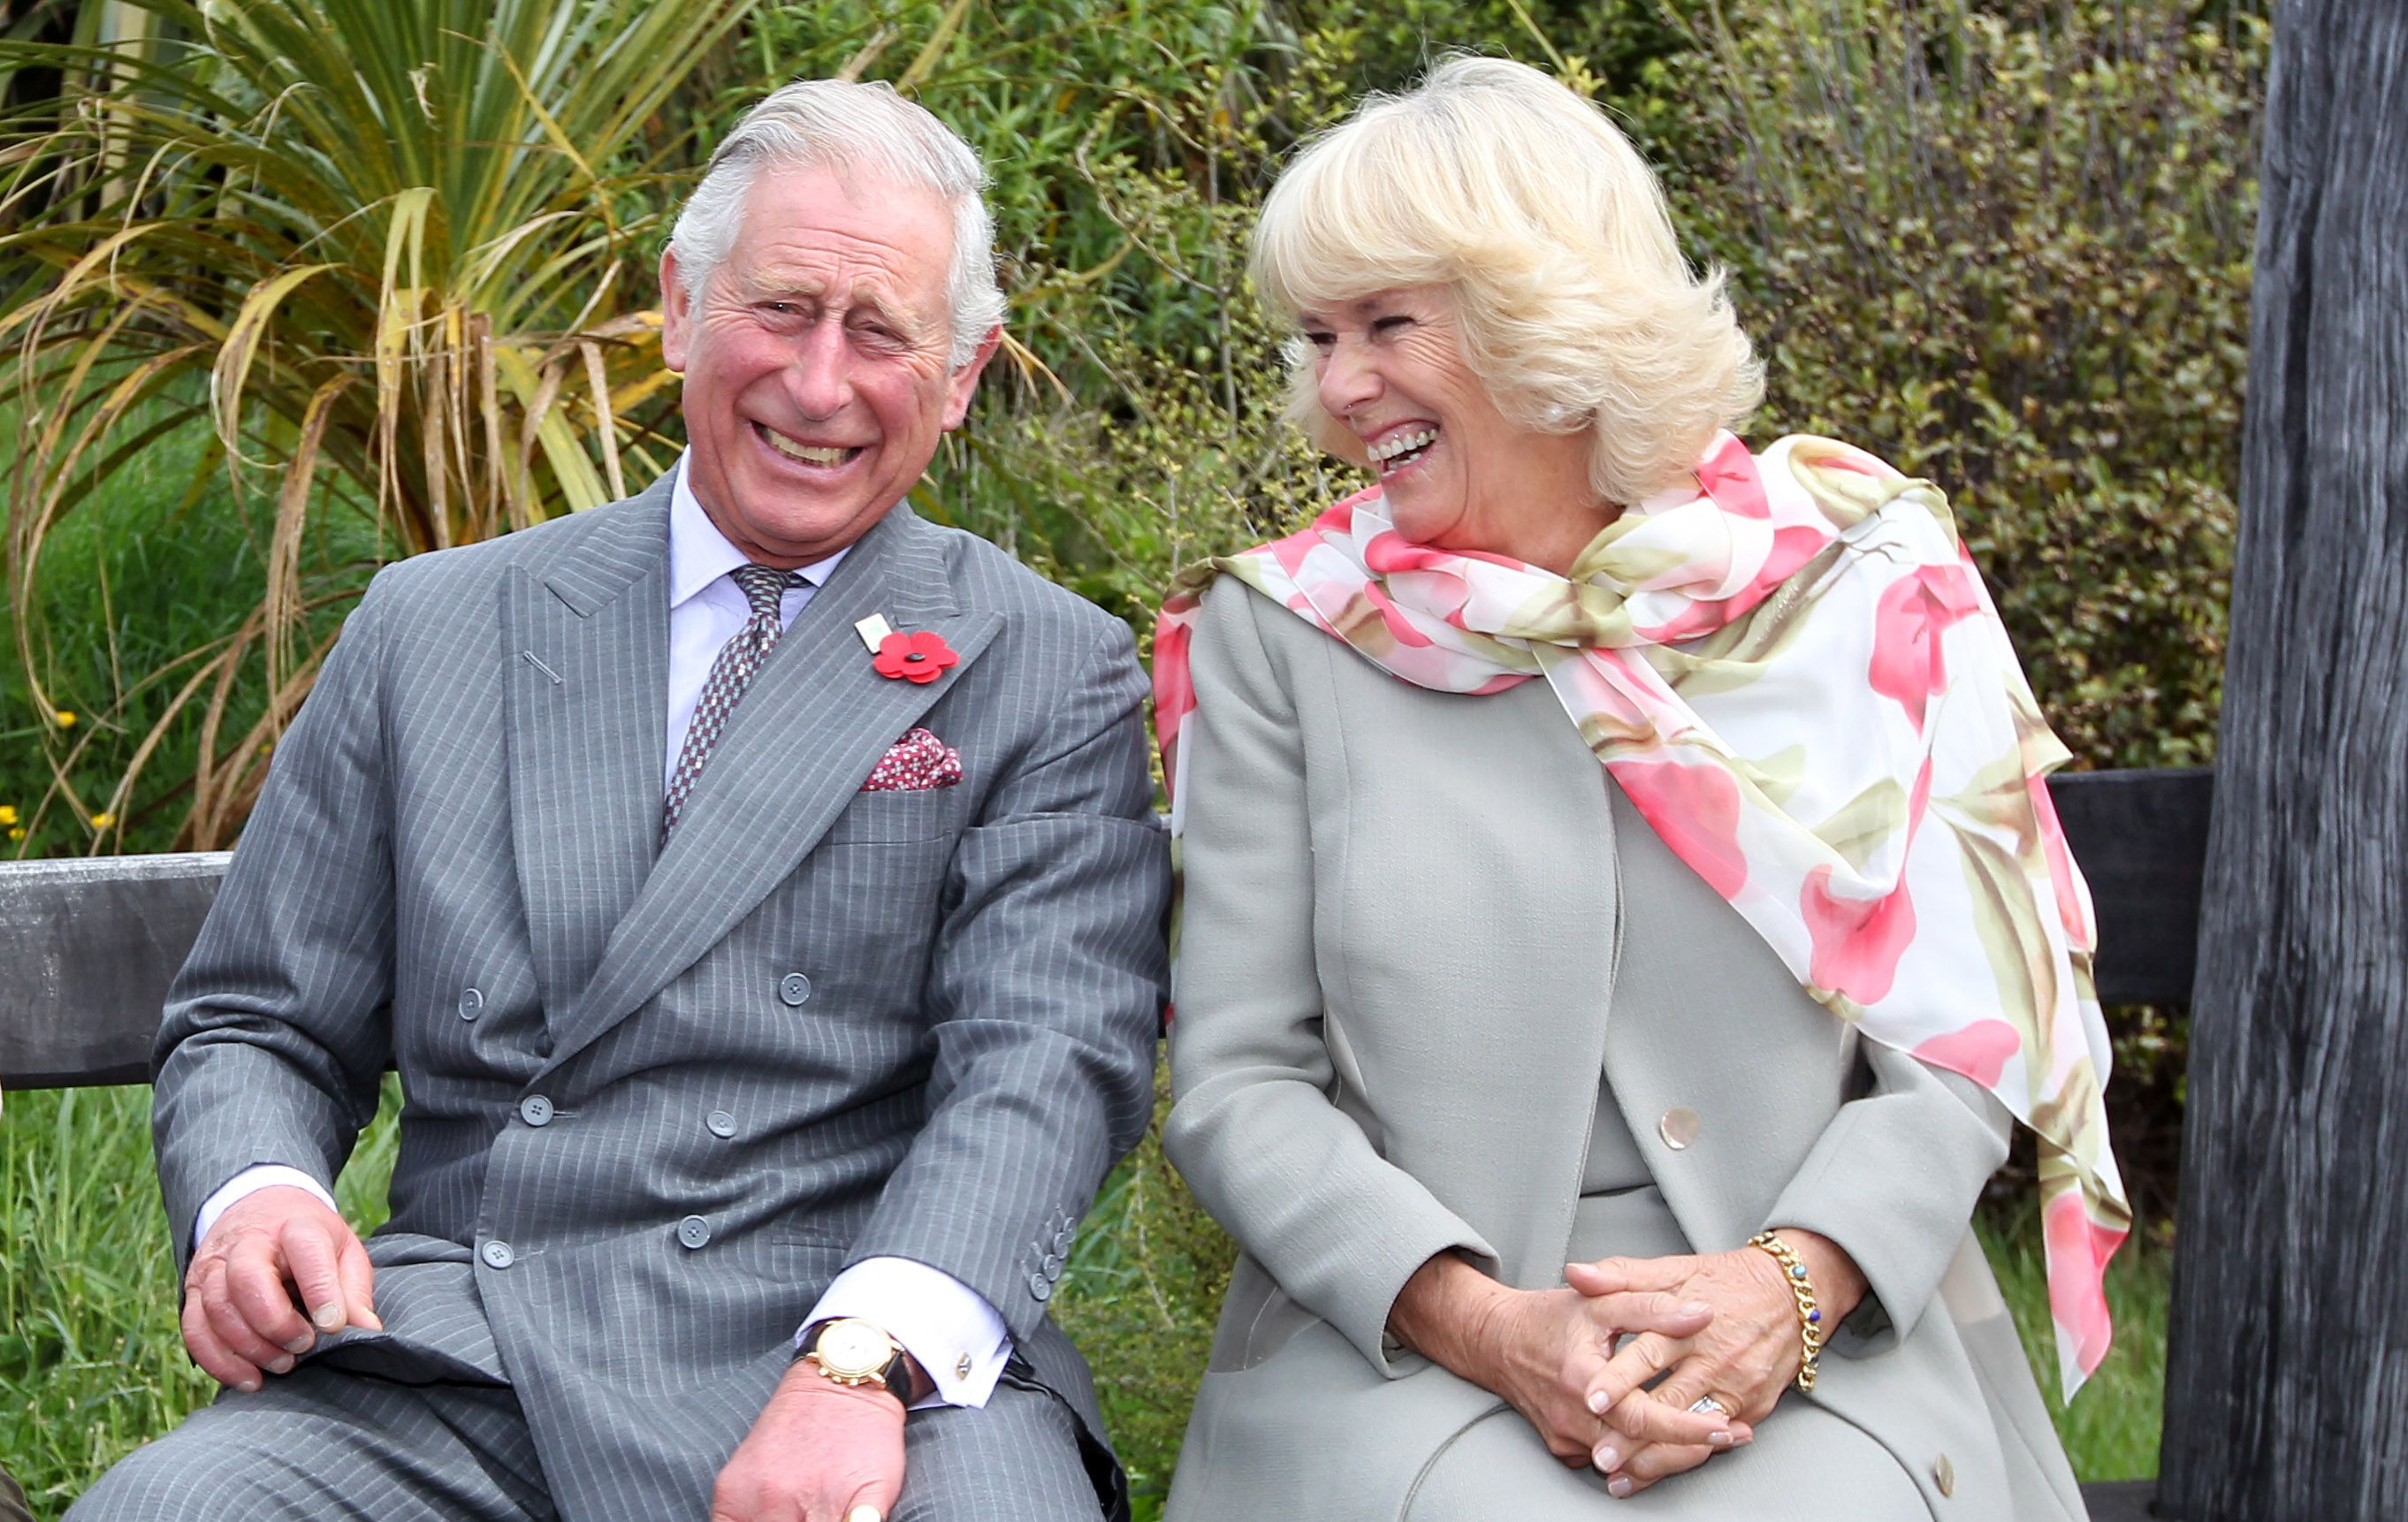 Prince Charles and Camilla Parker Bowles Relationship Timeline, The Crown